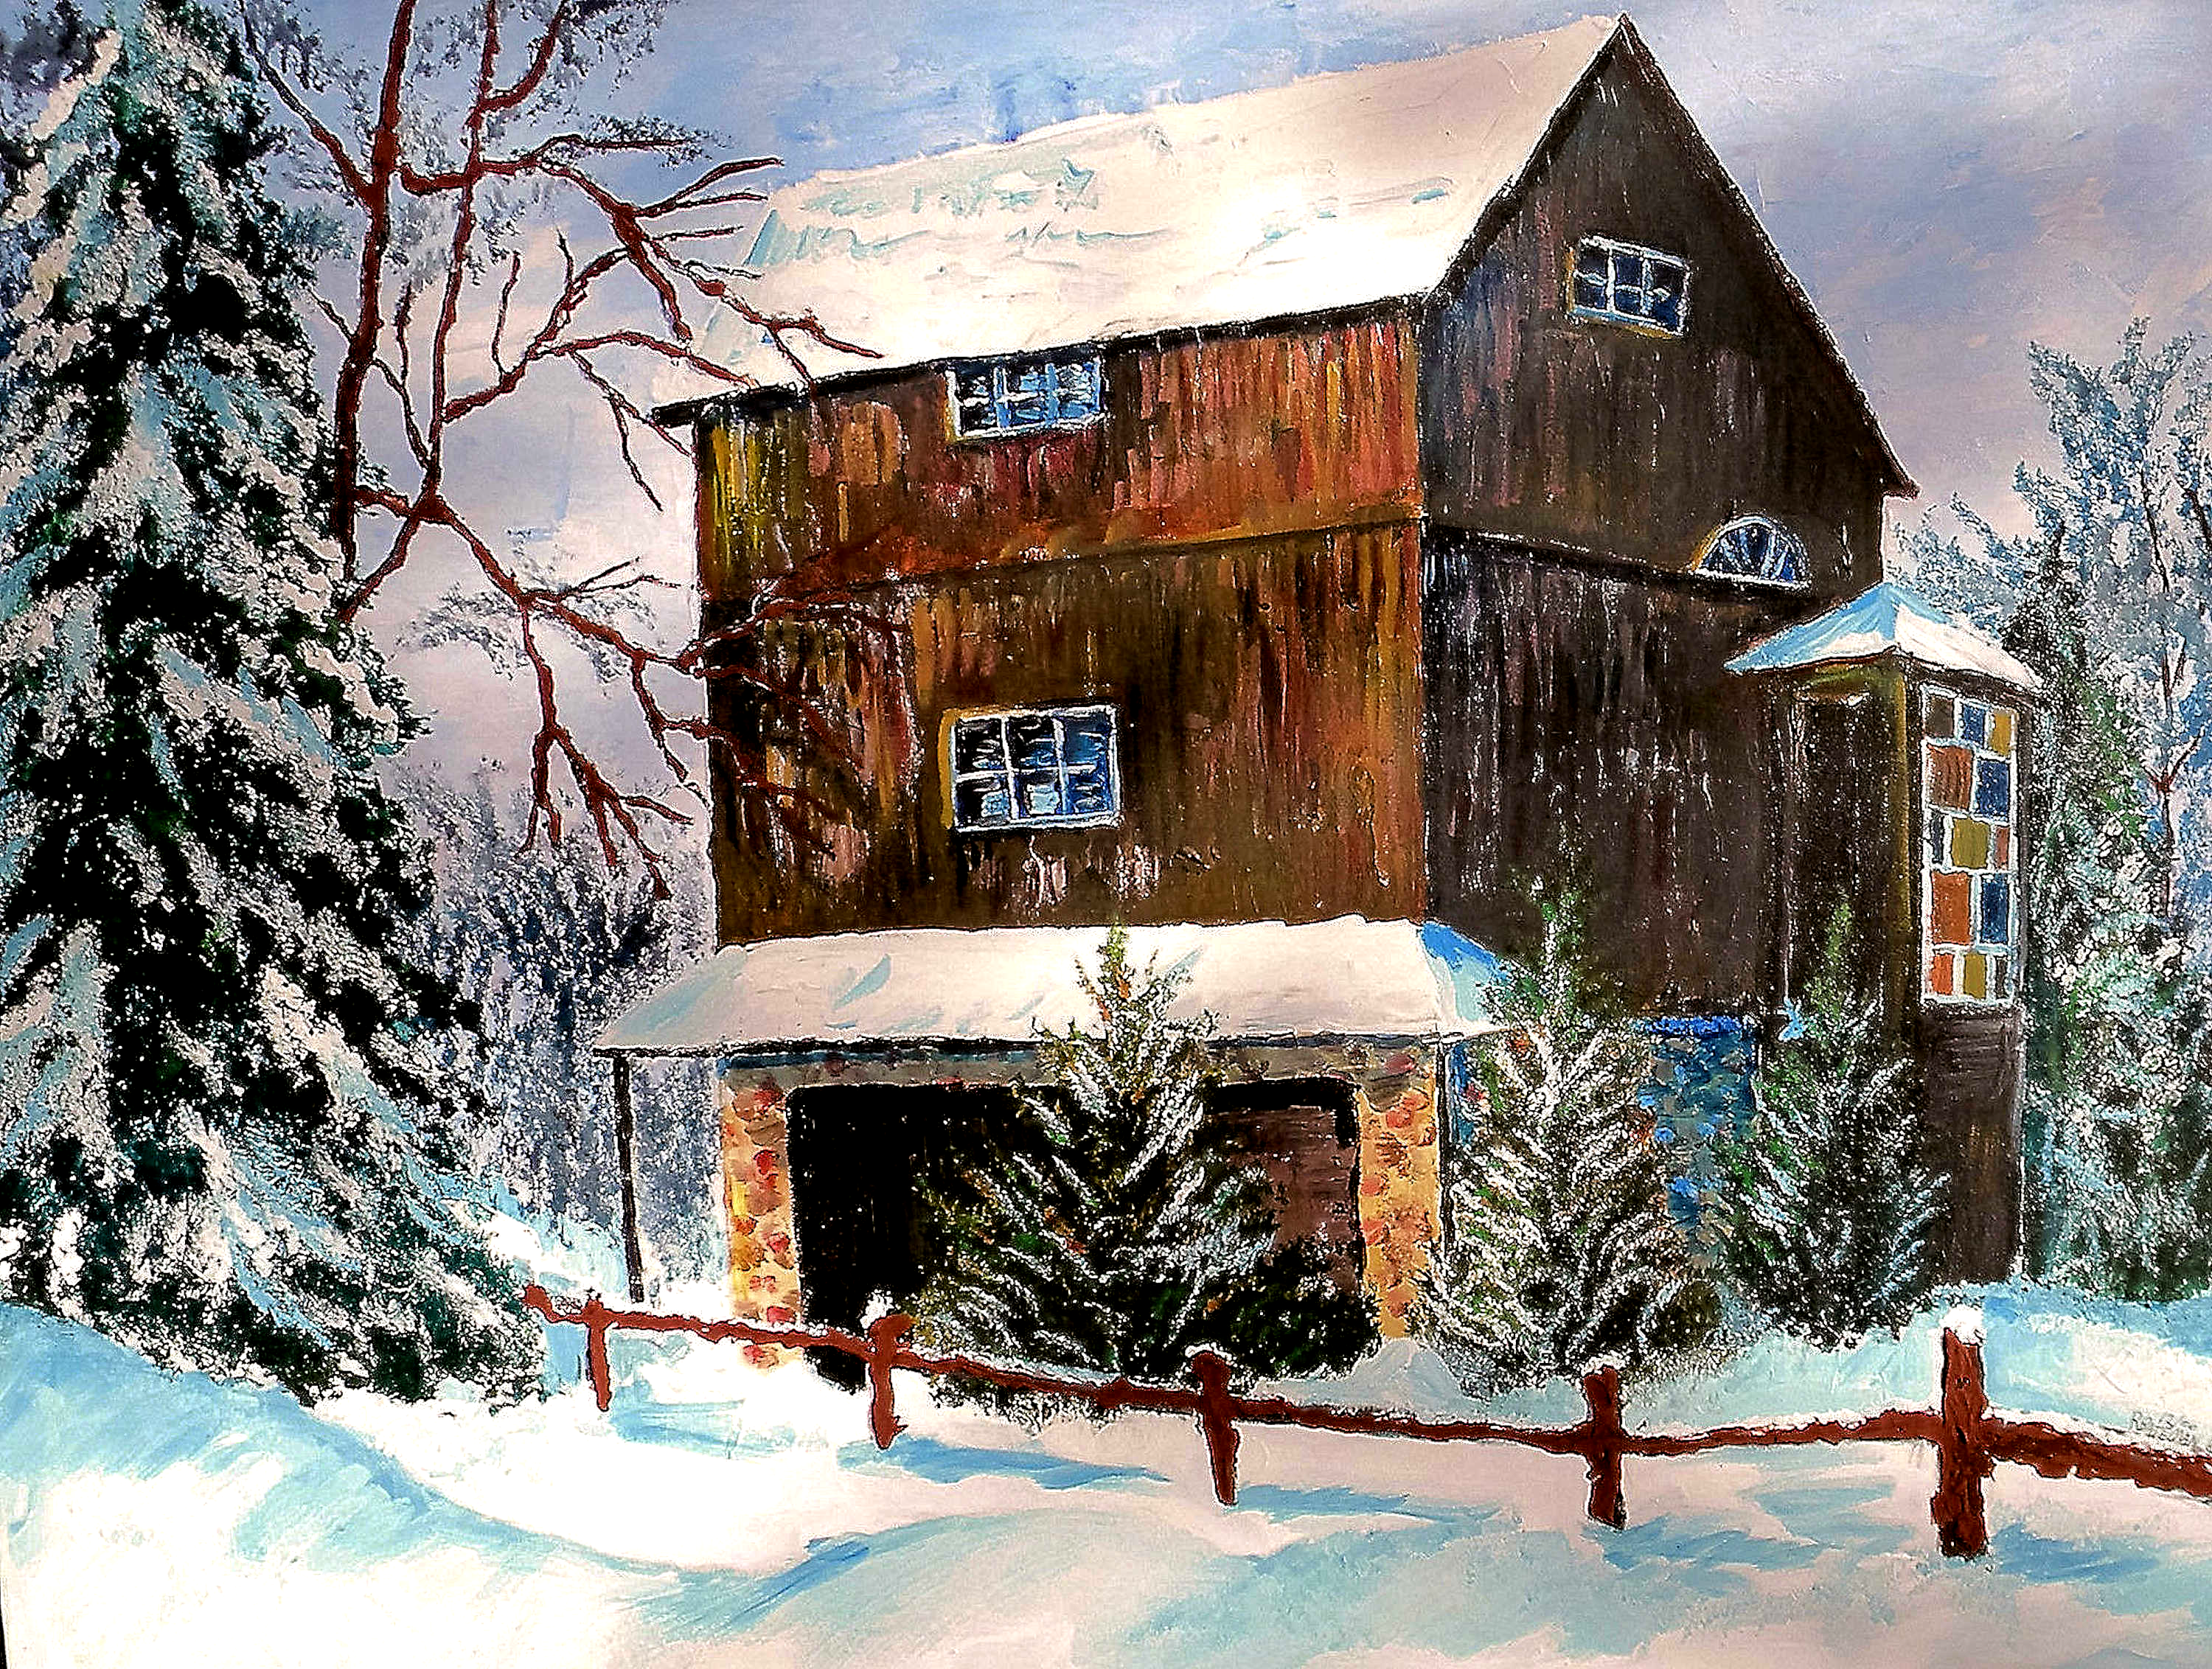 THE BARN  30X40"       $600
  HIGHLIGHTED WITH GLOW IN DARK LUMINESCENT PAINT